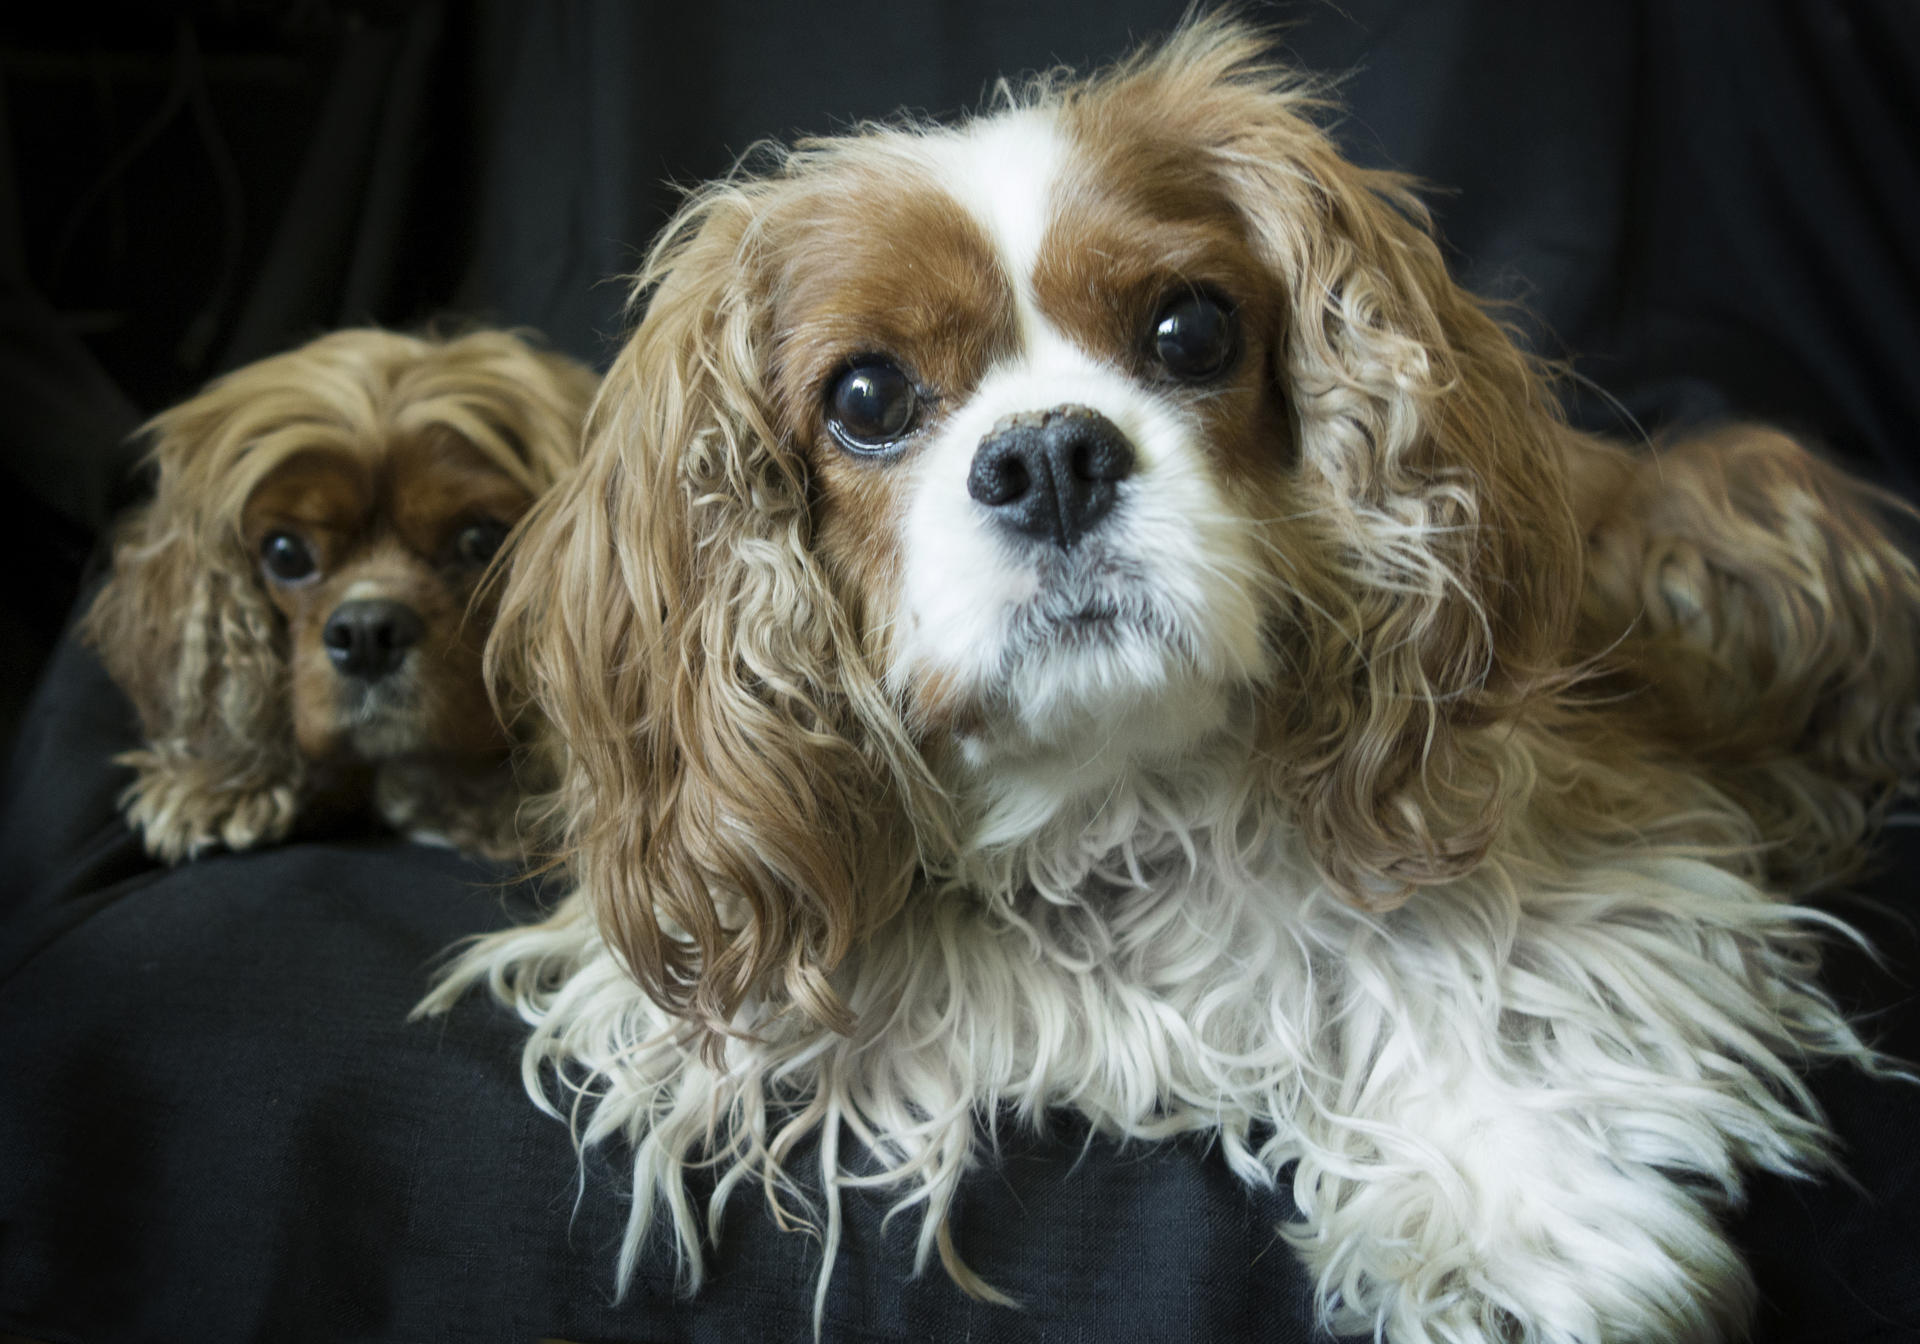 Cavalier King Charles spaniels are prone to neurological problems. Photos: Thinkstock